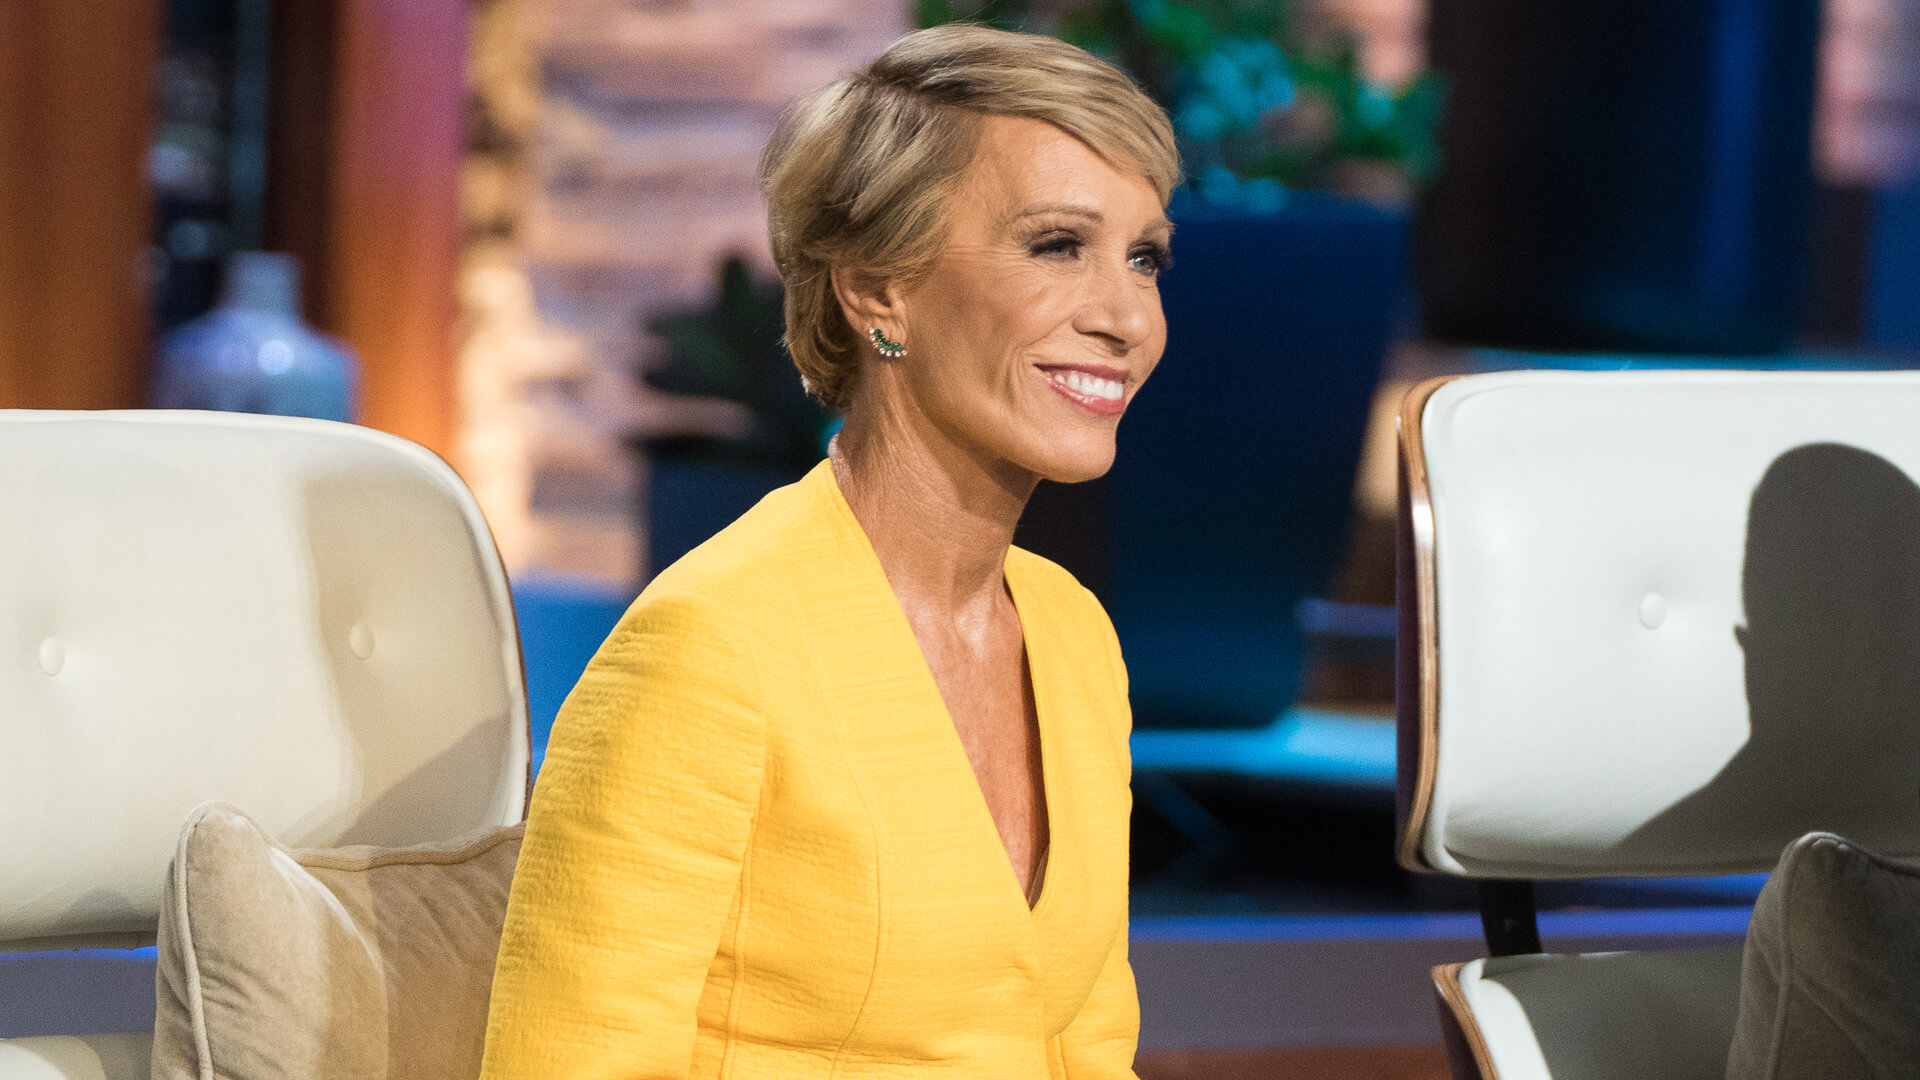 barbara corcoran: 3 cities to invest in real estate now before prices skyrocket